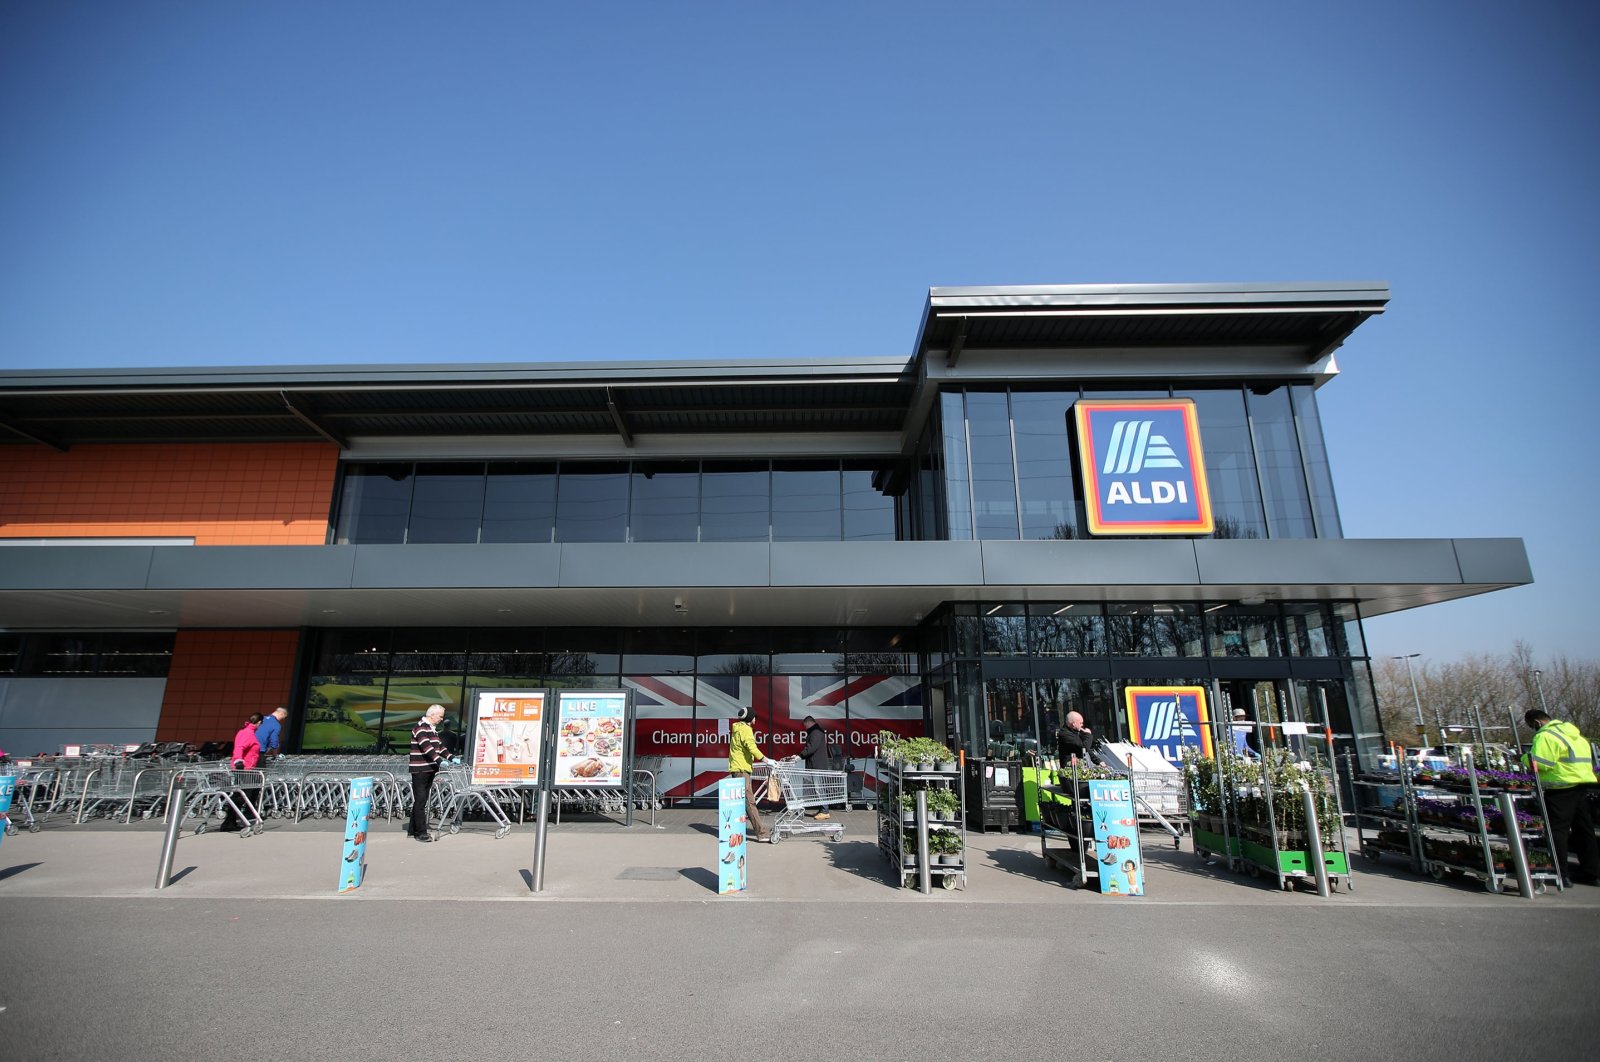 People follow social distancing rules while they queue outside an Aldi store as the spread of the coronavirus disease continues, in Northwich, Britain, March 27, 2020. (Reuters File Photo)